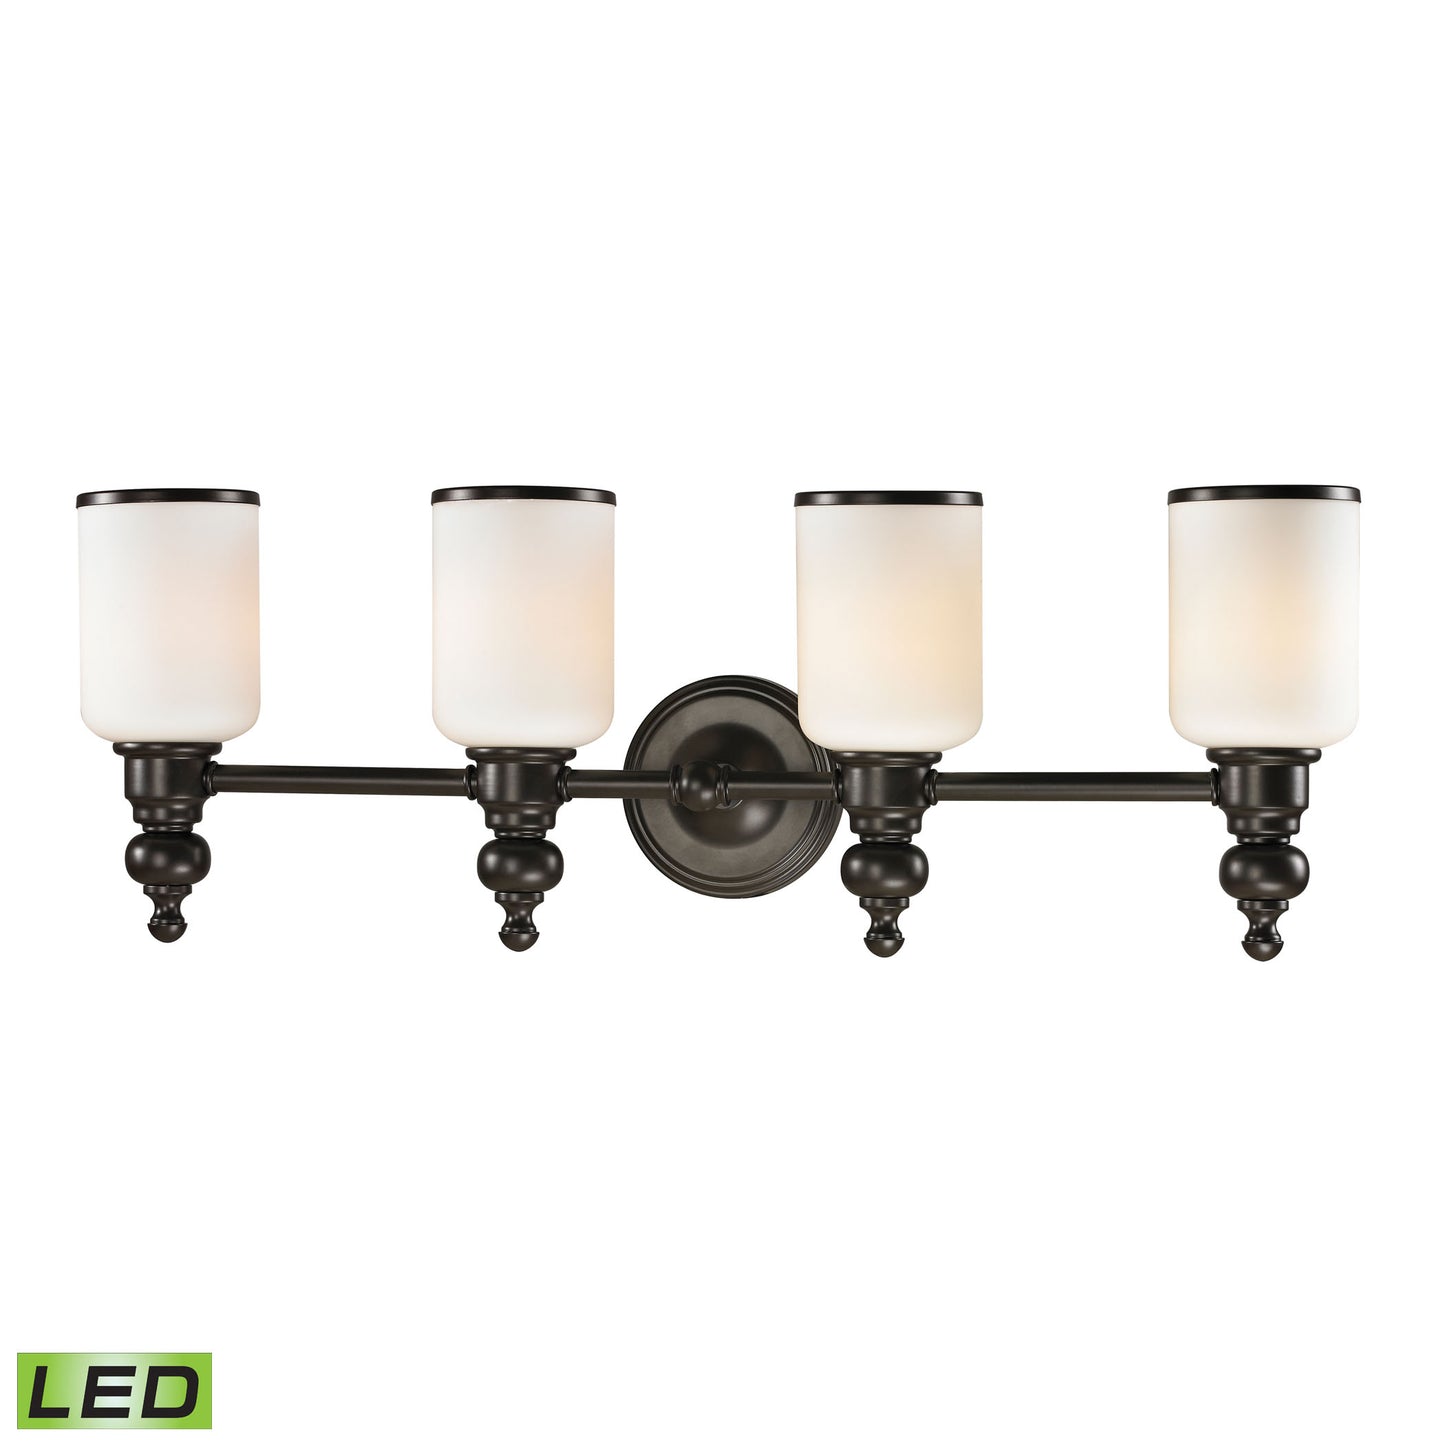 Bristol 4-Light Vanity Lamp in Oil Rubbed Bronze with Opal White Blown Glass - Includes LED Bulbs